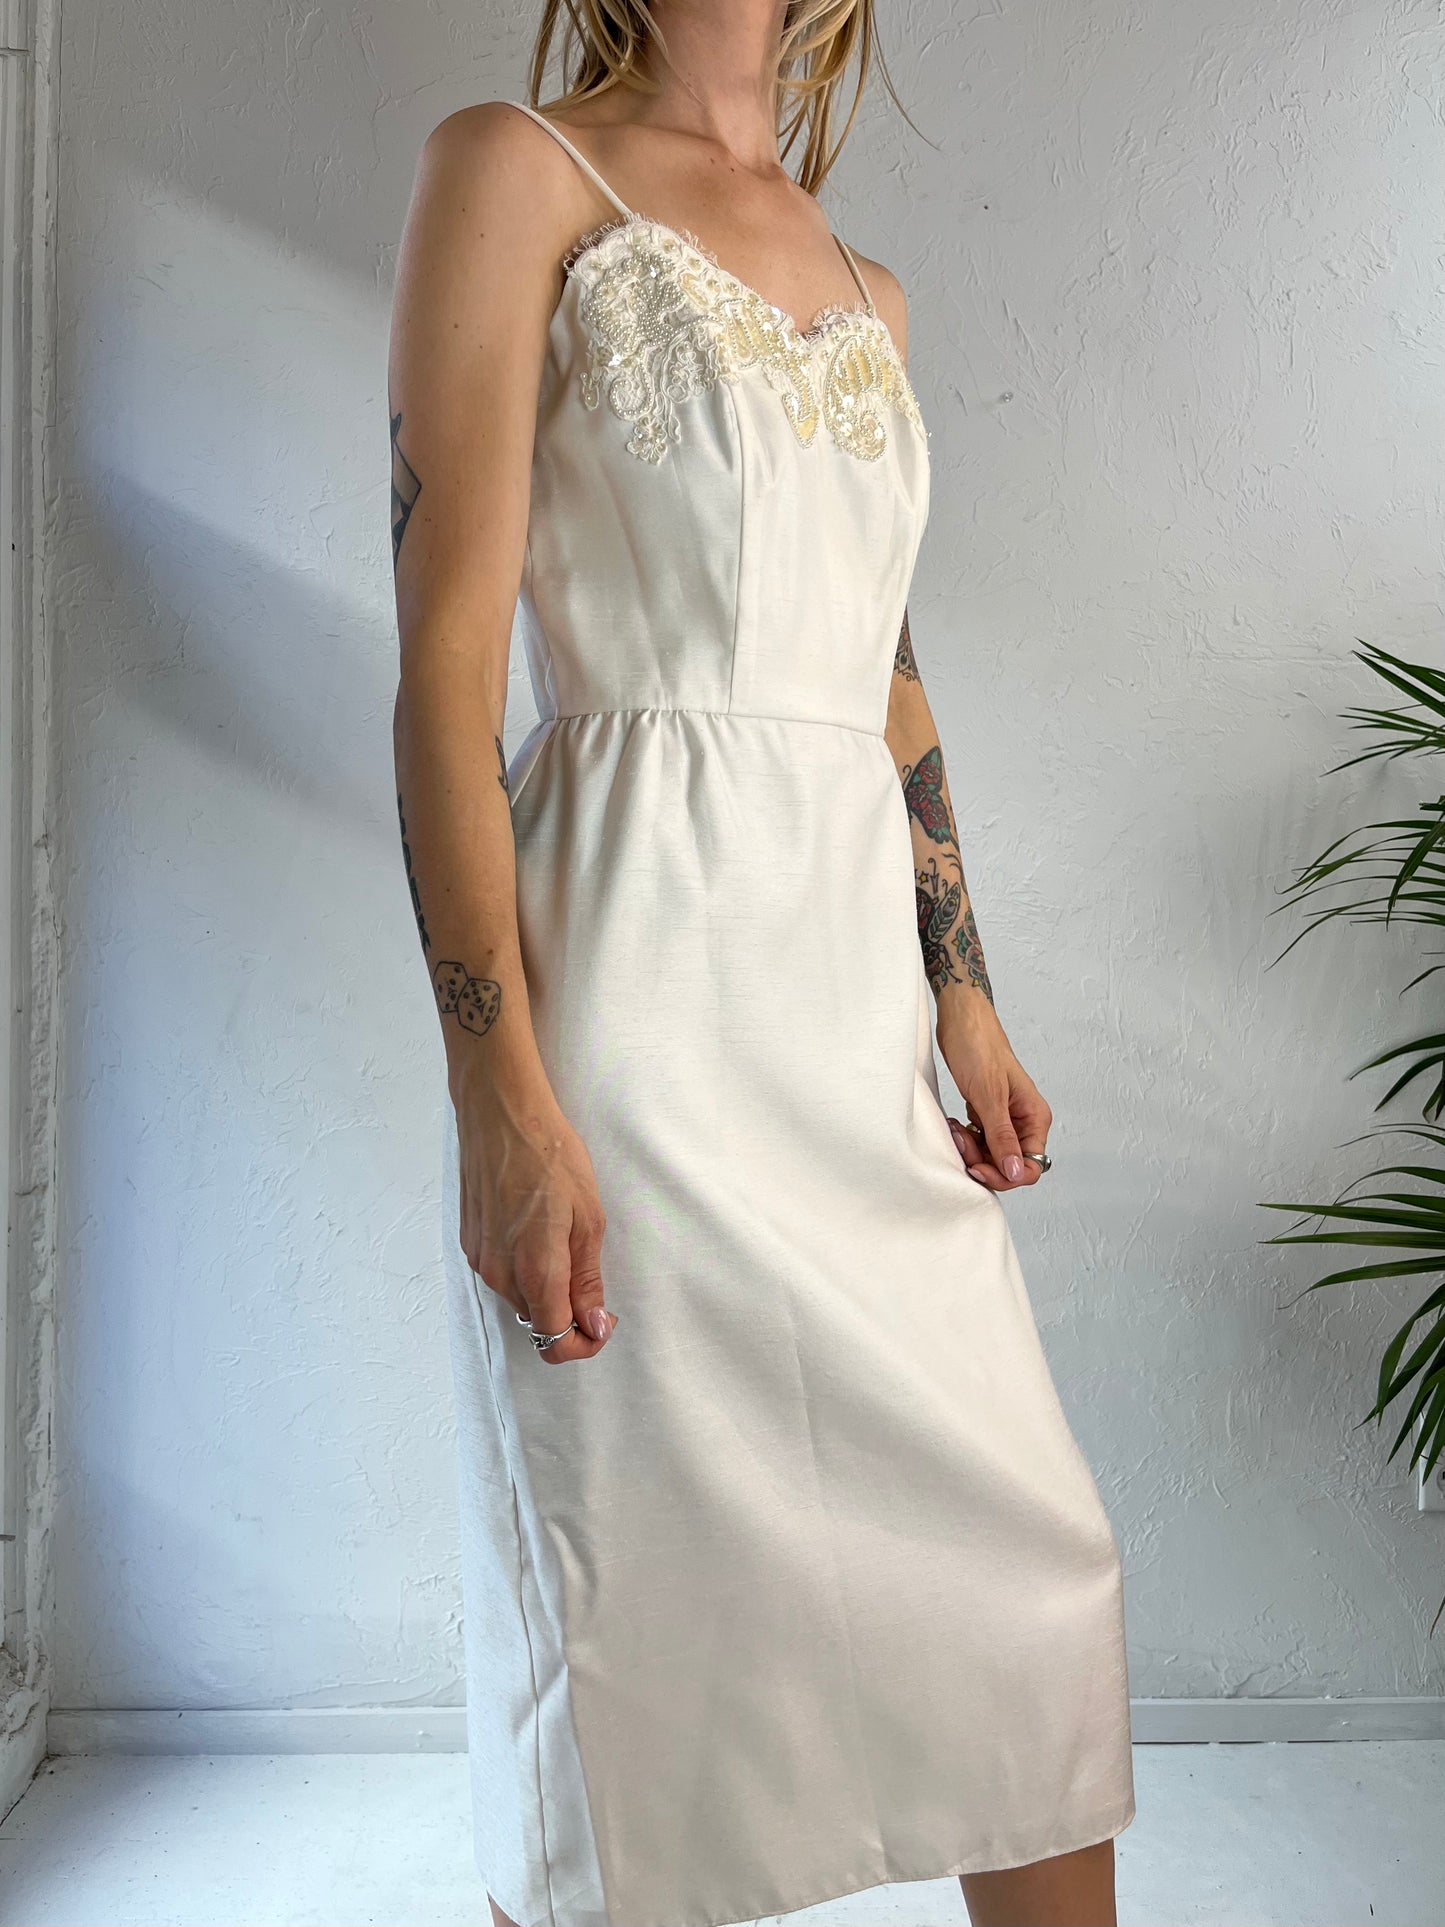 80s 'Gordon Dress' White Beaded and Sequin Lace Trimmed Cocktail Dress / Small